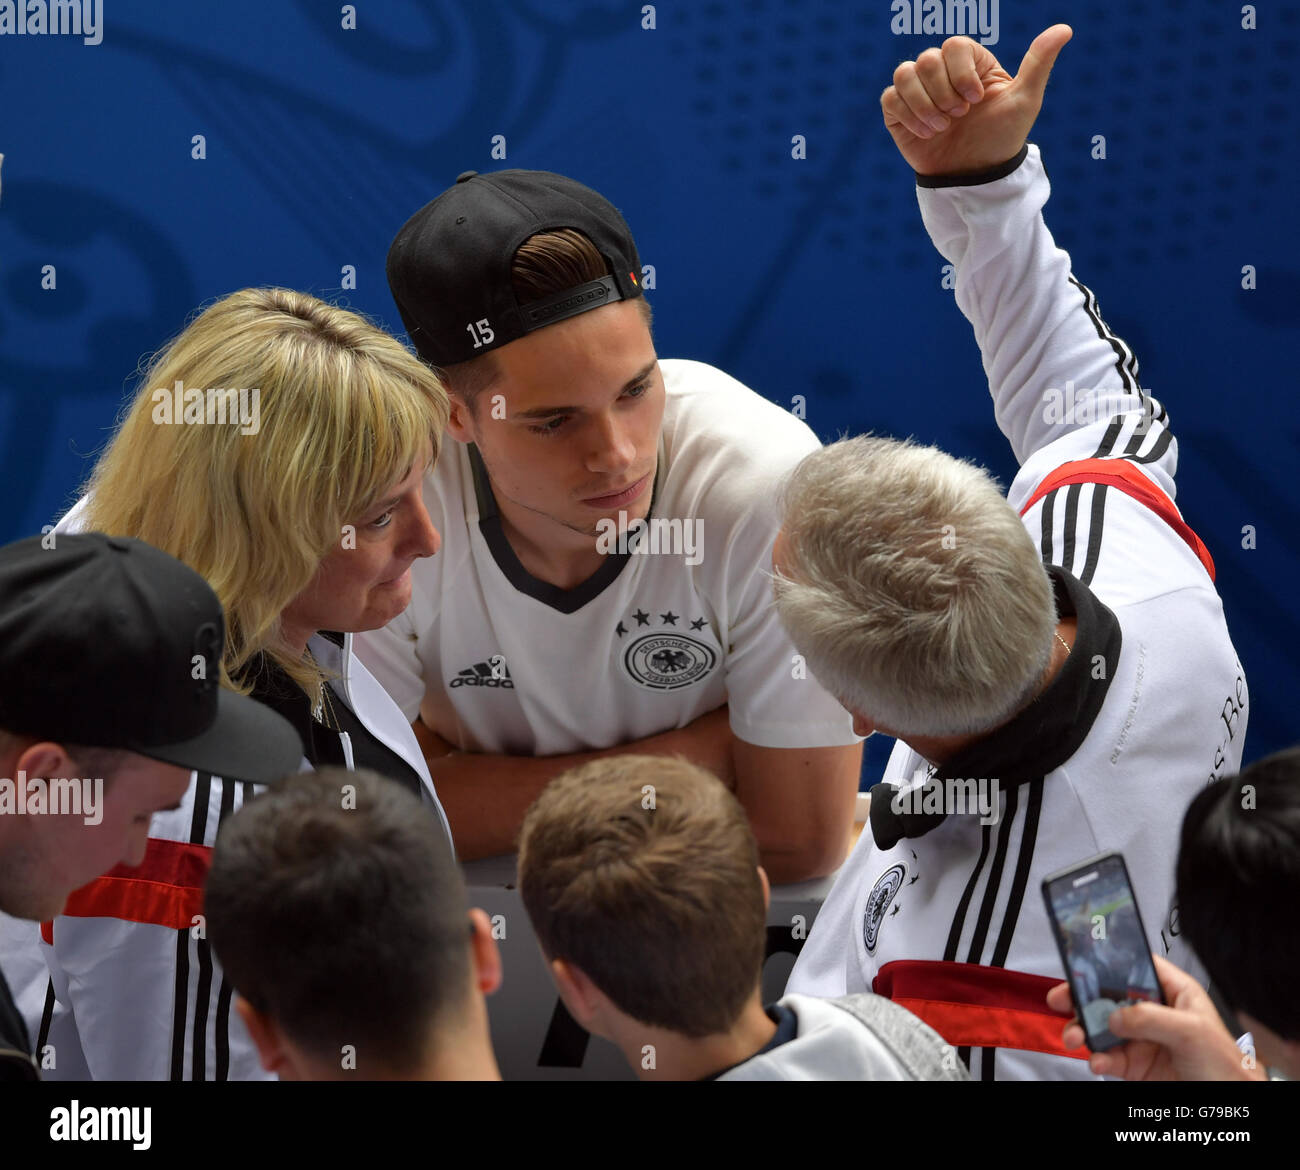 Lille, France. 26th June, 2016. Julian Weigl (C) of Germany talks to his  parents, father Hans (R) and mother Sabine, prior to the UEFA EURO 2016  Round of 16 soccer match between